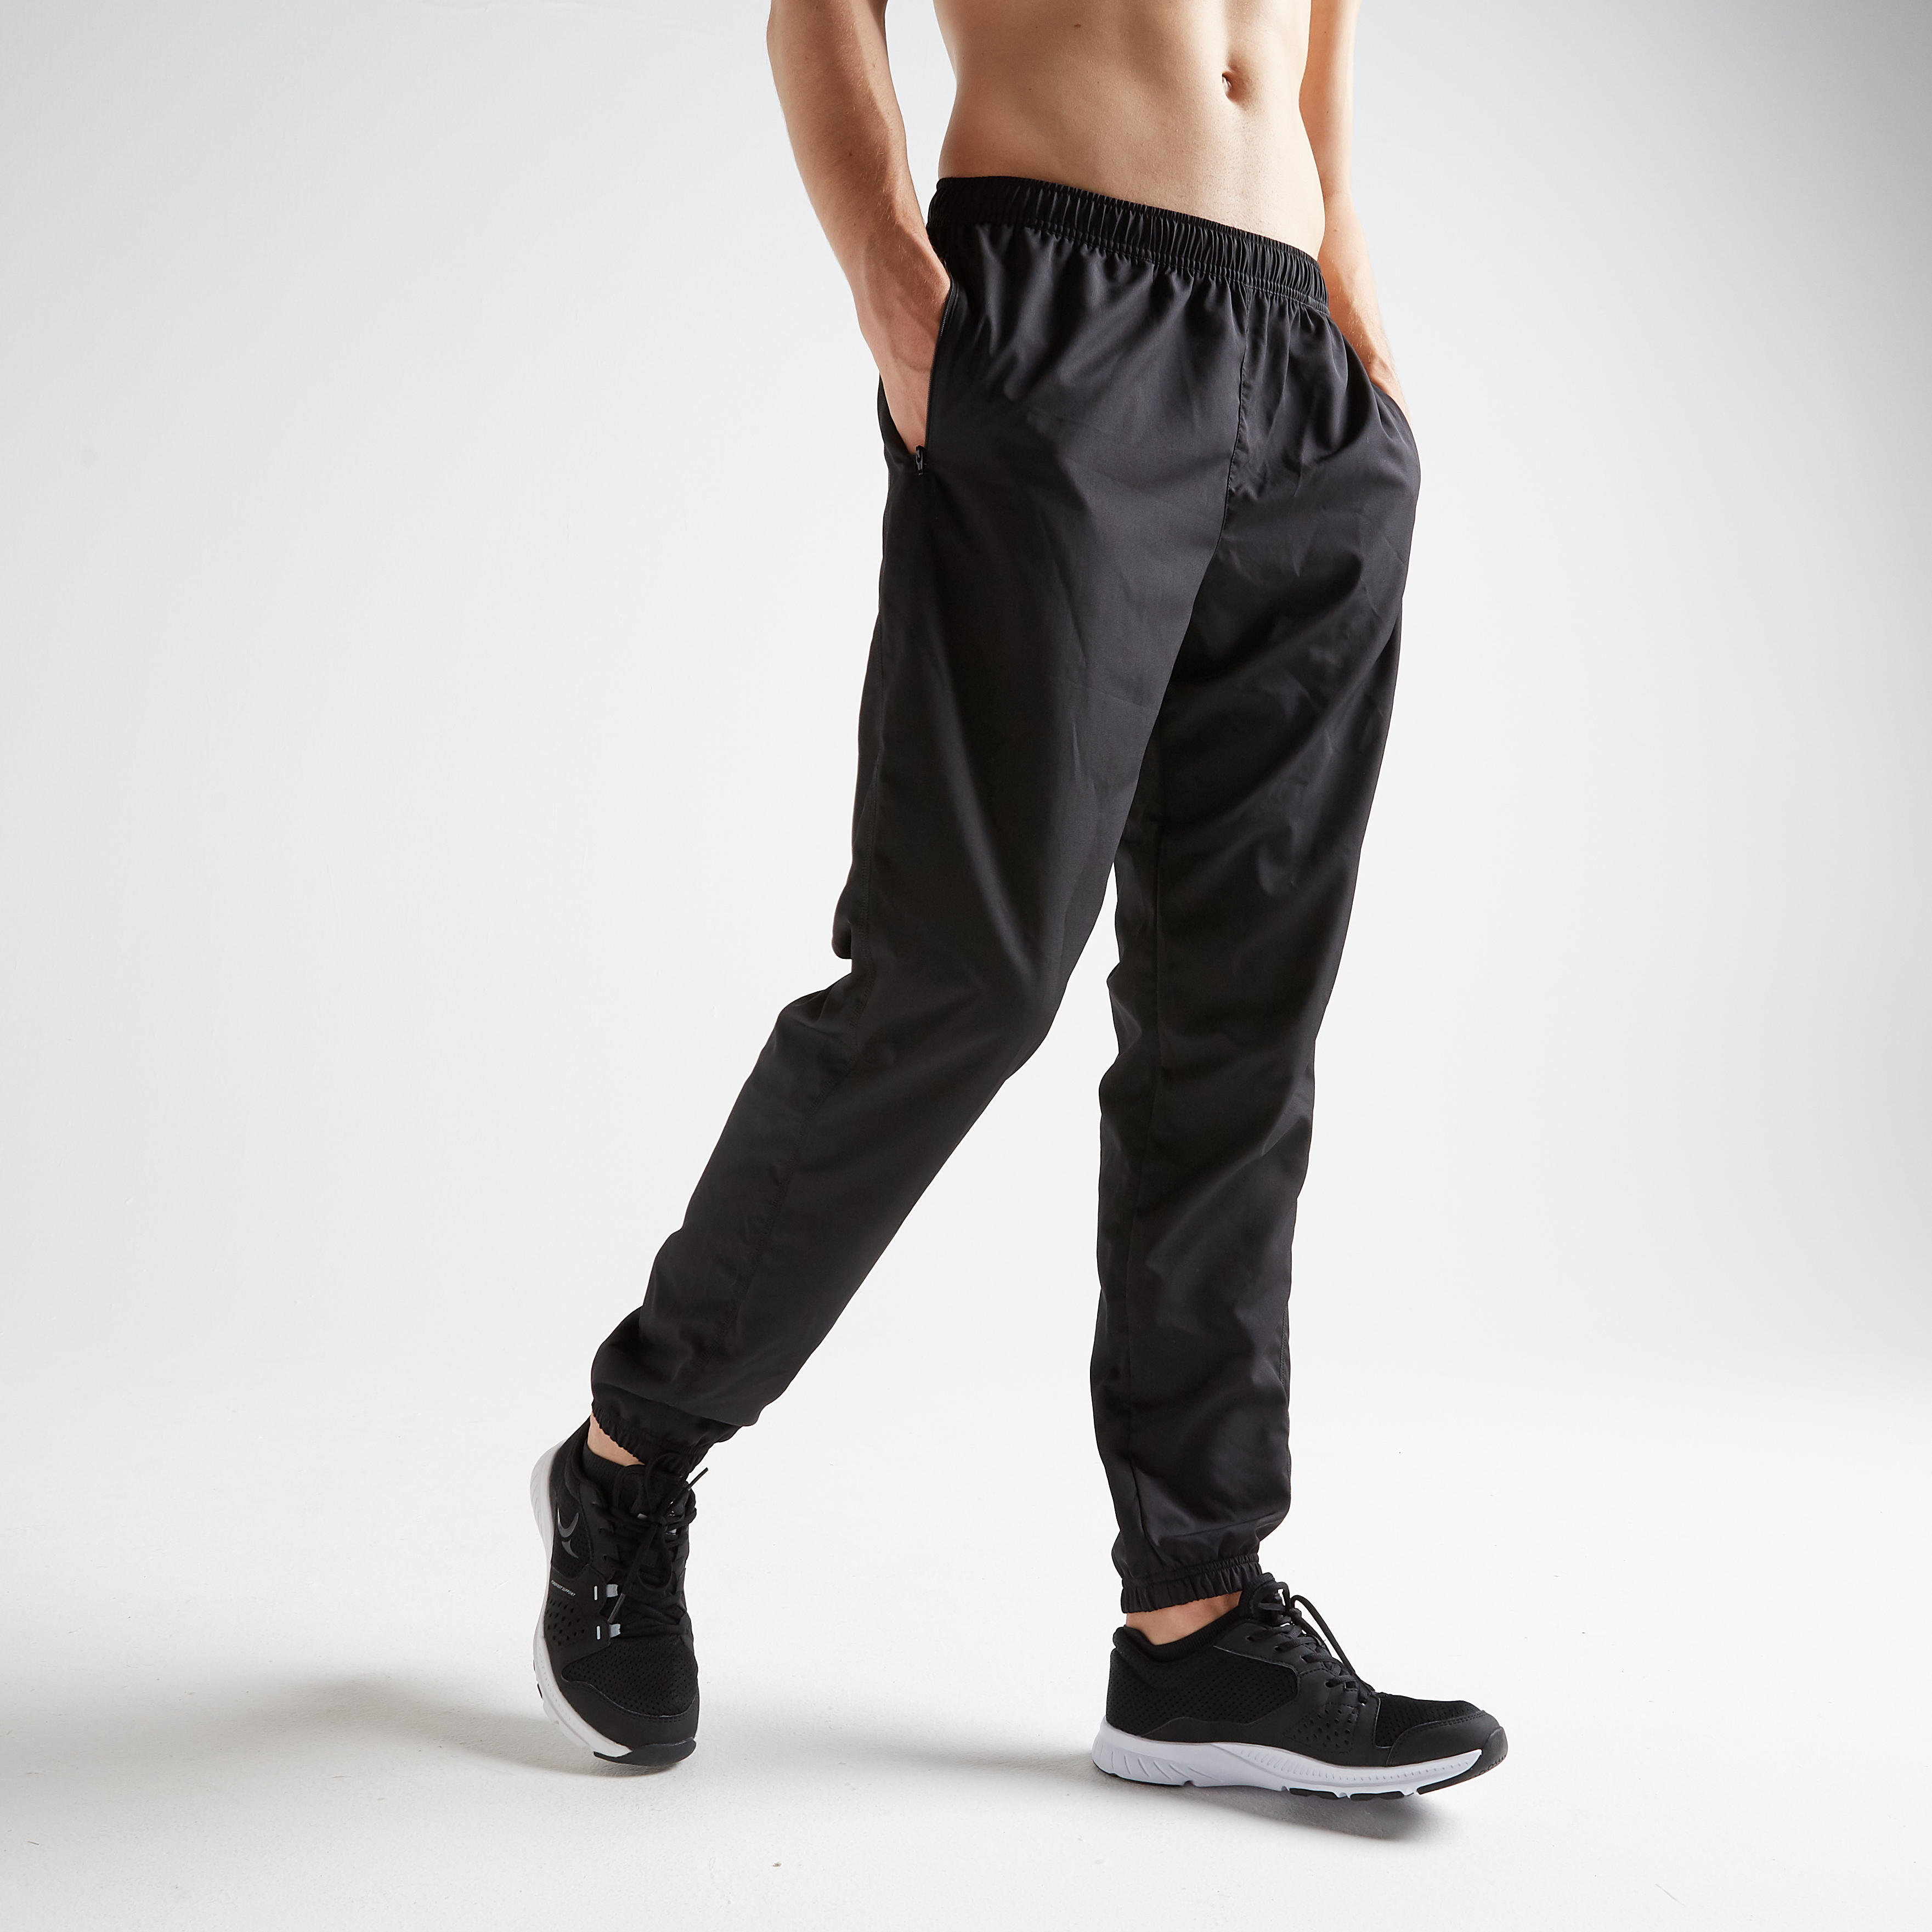 Workout Clothes online at Decathlon India